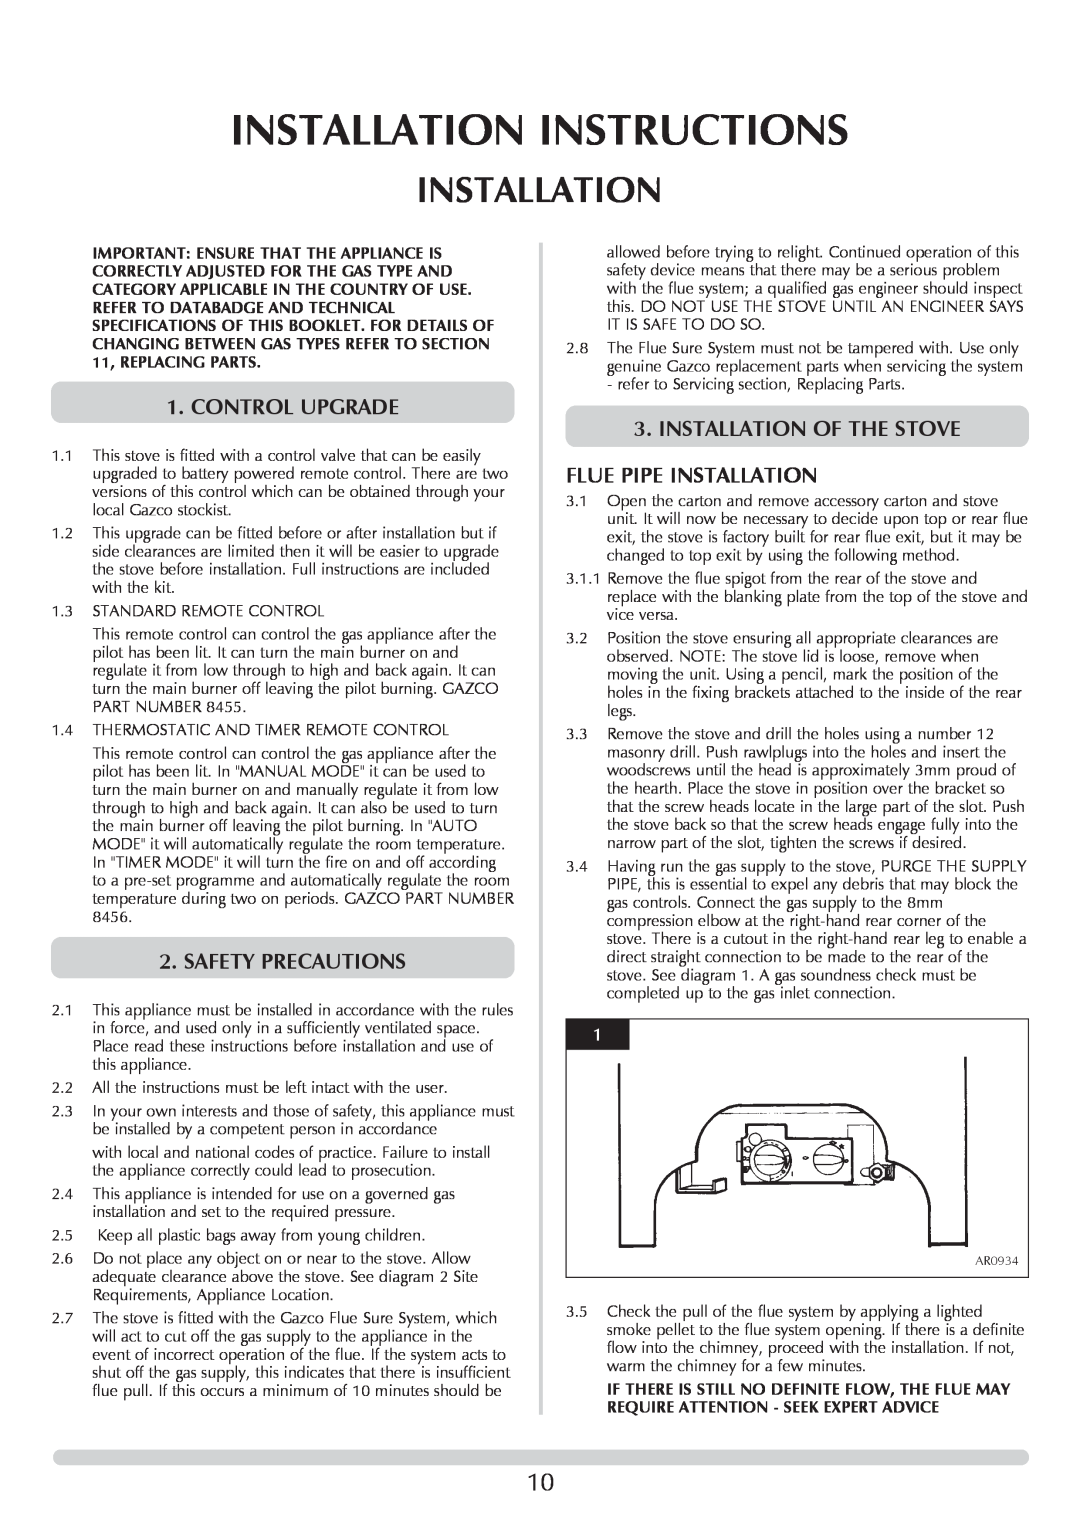 Stovax 705088 manual Installation Instructions, Control Upgrade, Safety Precautions, Installation Of The Stove 